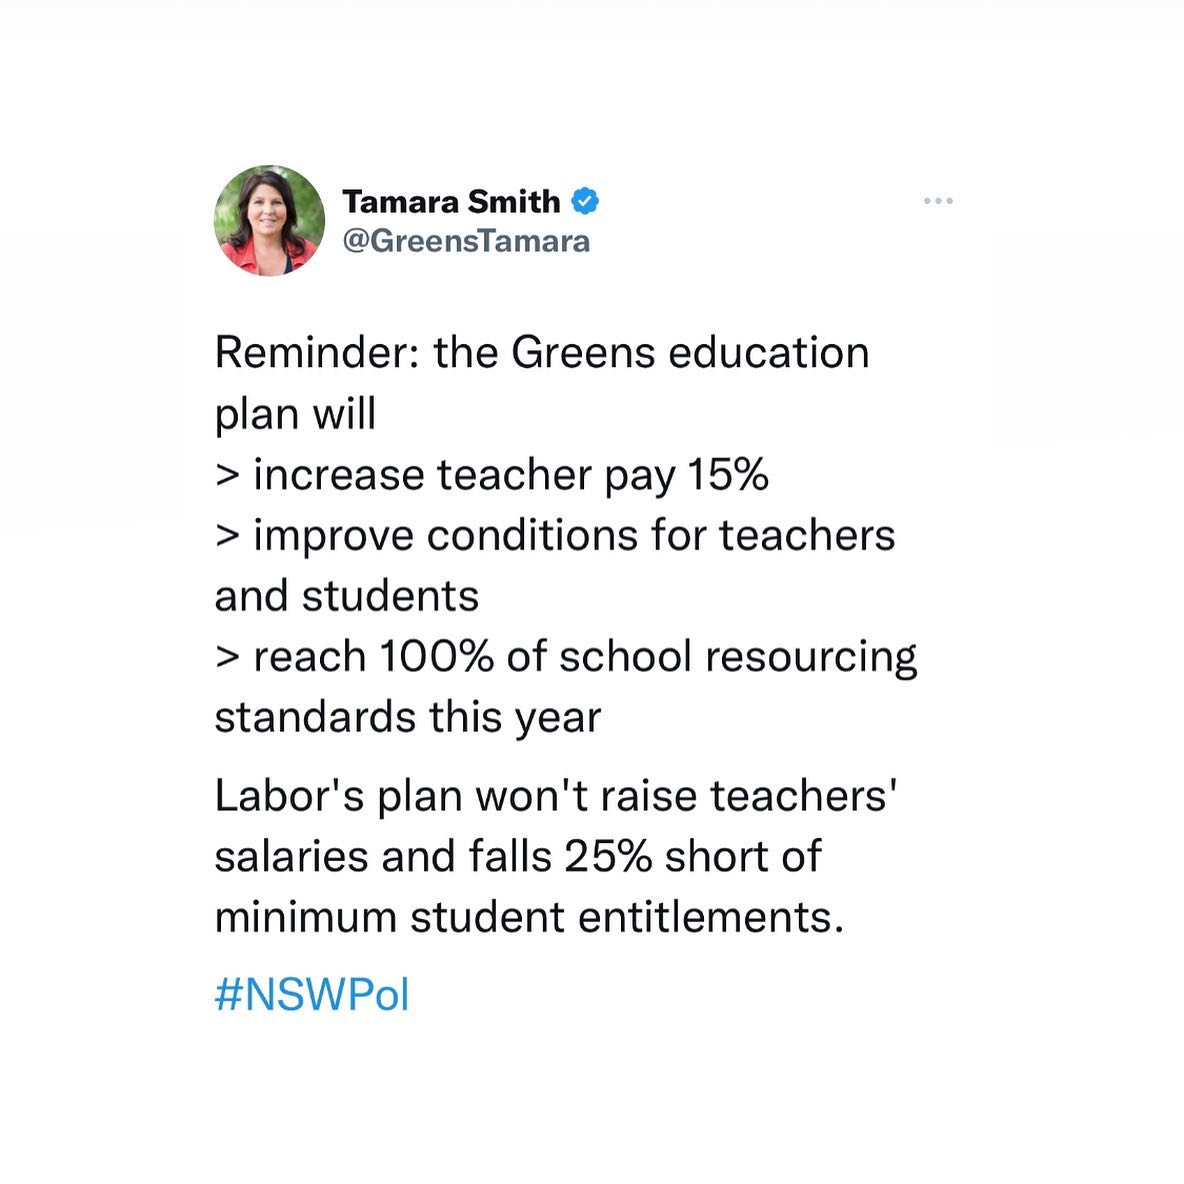 The Greens NSW: We need to make sure public school students get a fair go. Teache…